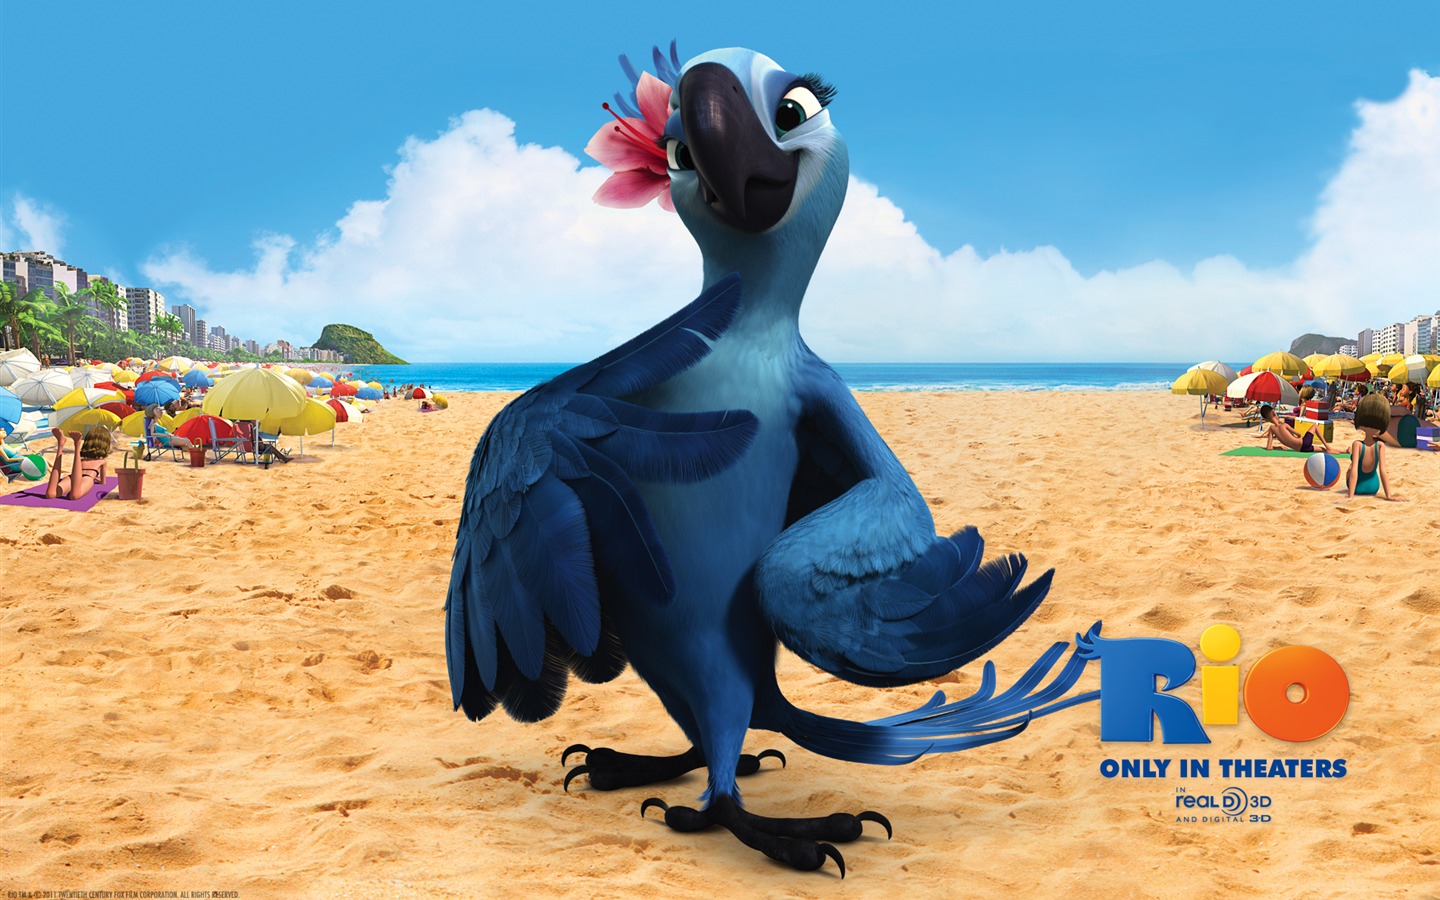 Rio 2011 wallpapers #5 - 1440x900